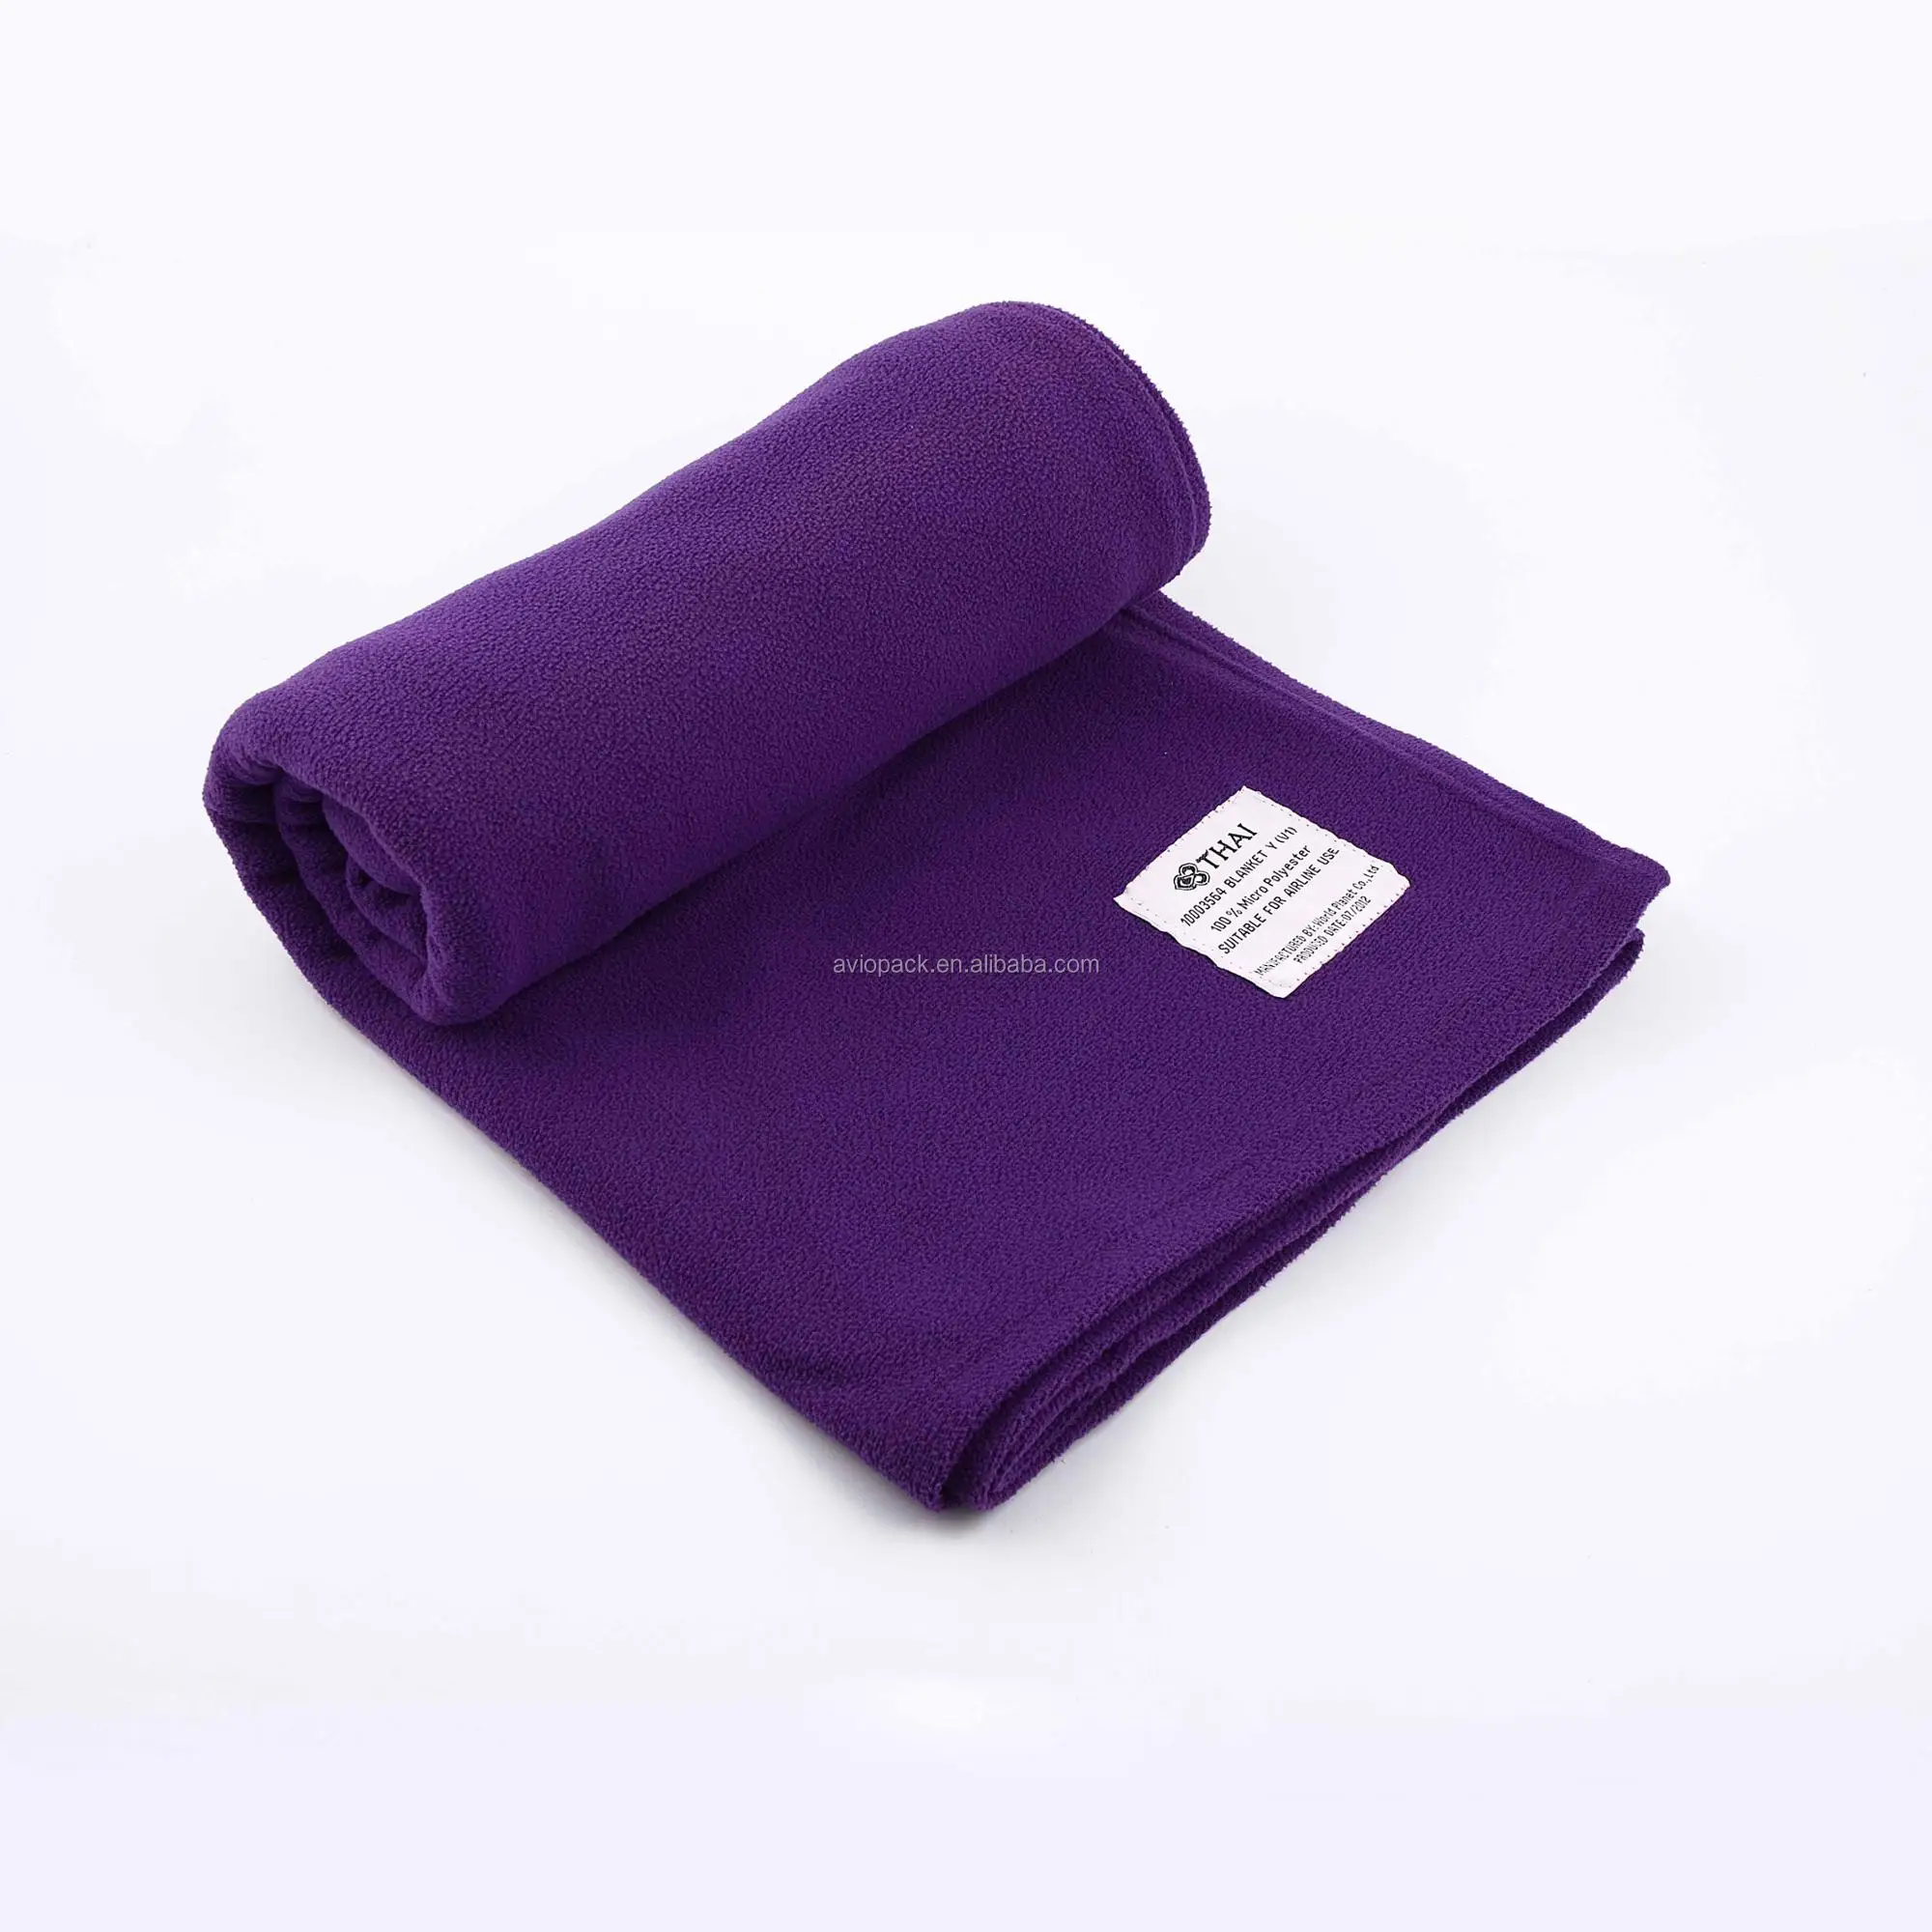 Disposable Airline Blanket - Buy Airline Blanket Product on Alibaba.com